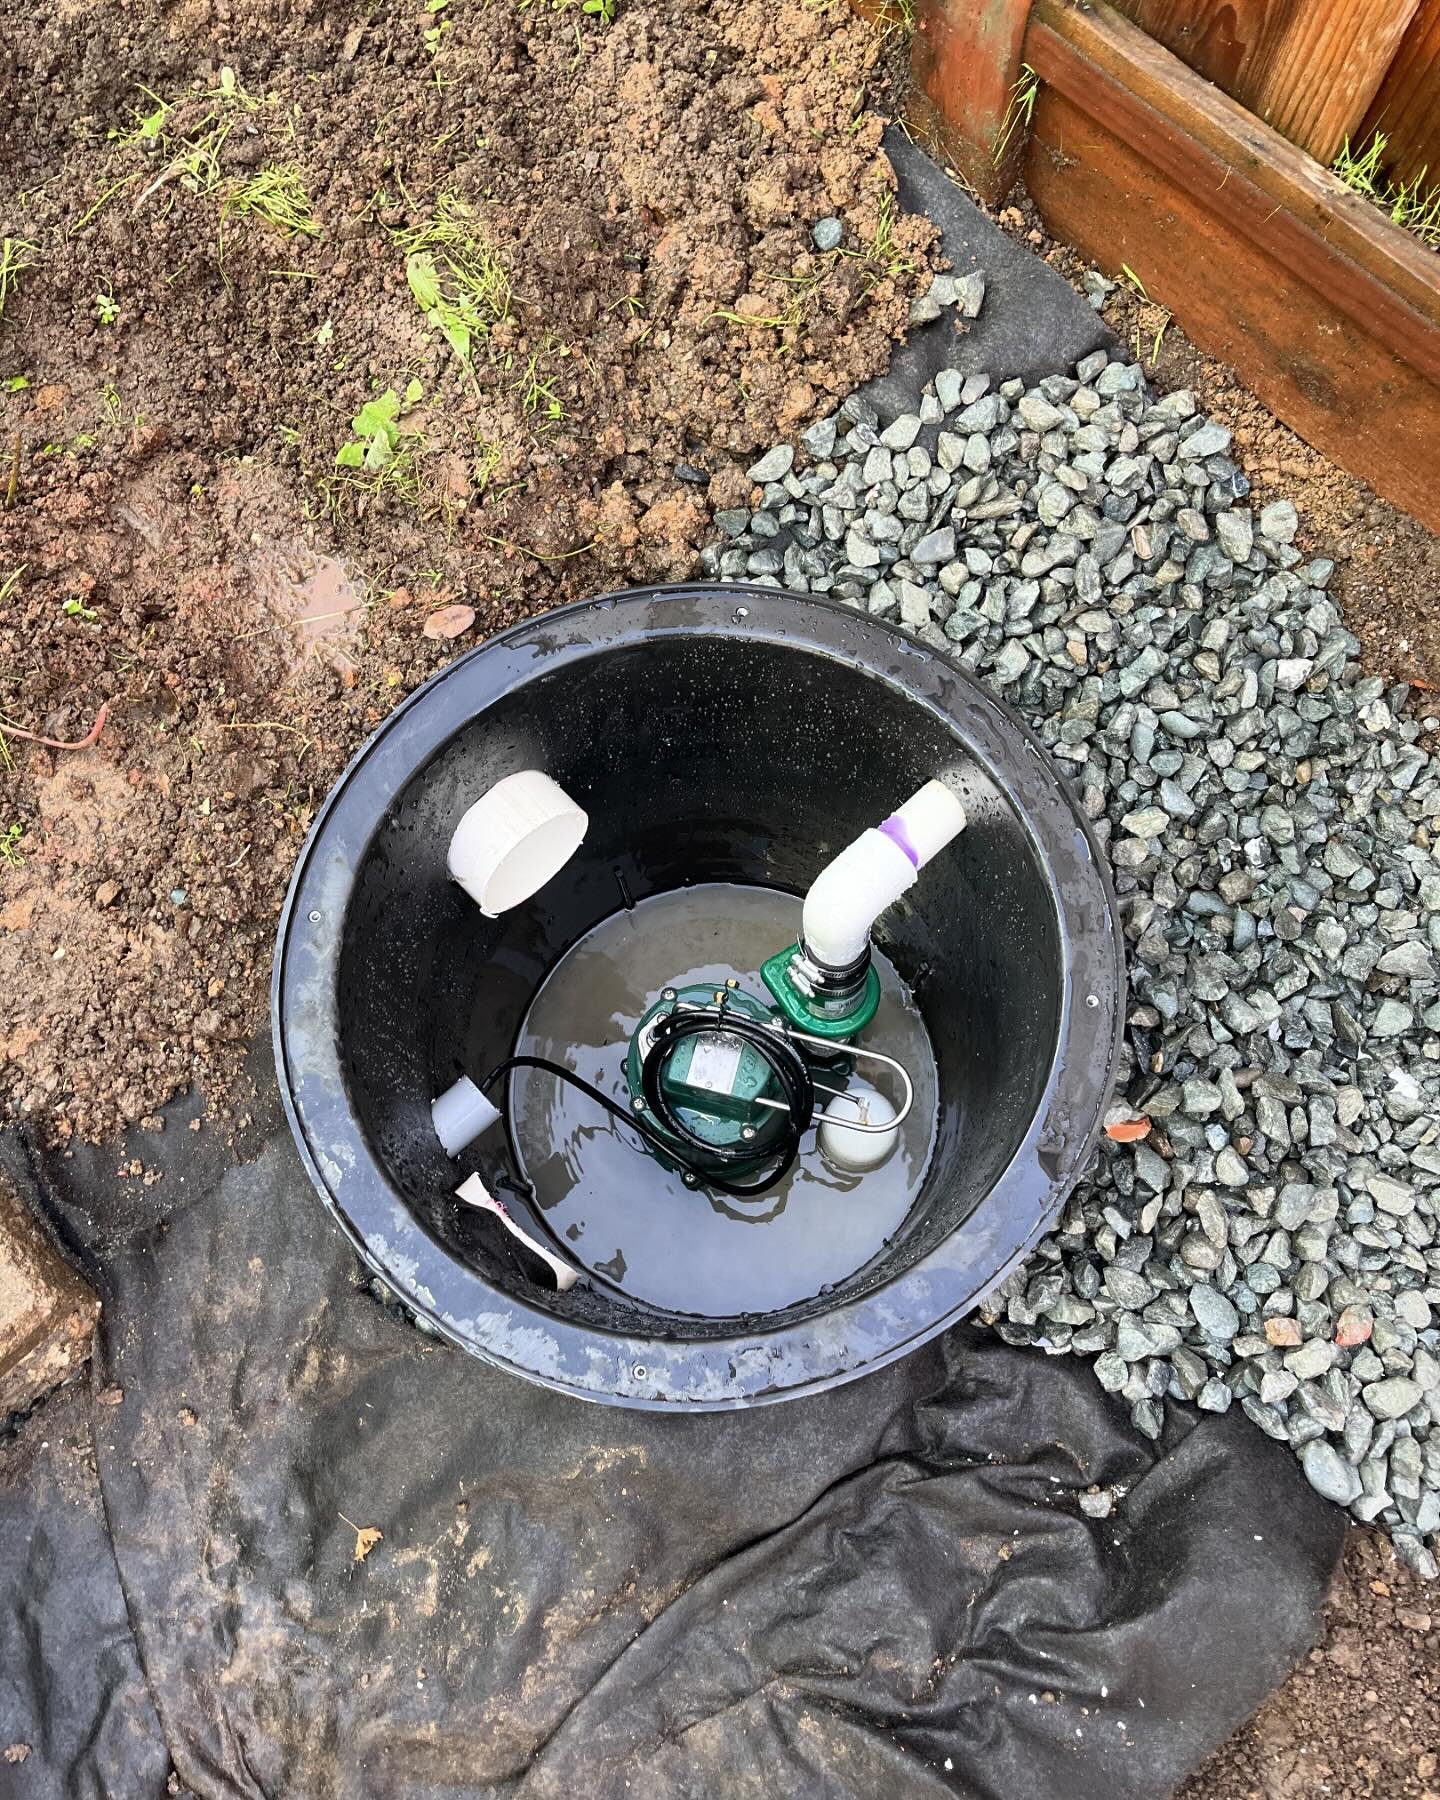 Summer is here! Perfect time to check on that sump pump. Don&rsquo;t wait for the rains to see if it still works! Message me for sump pump repairs, maintenance, or new installations!!!